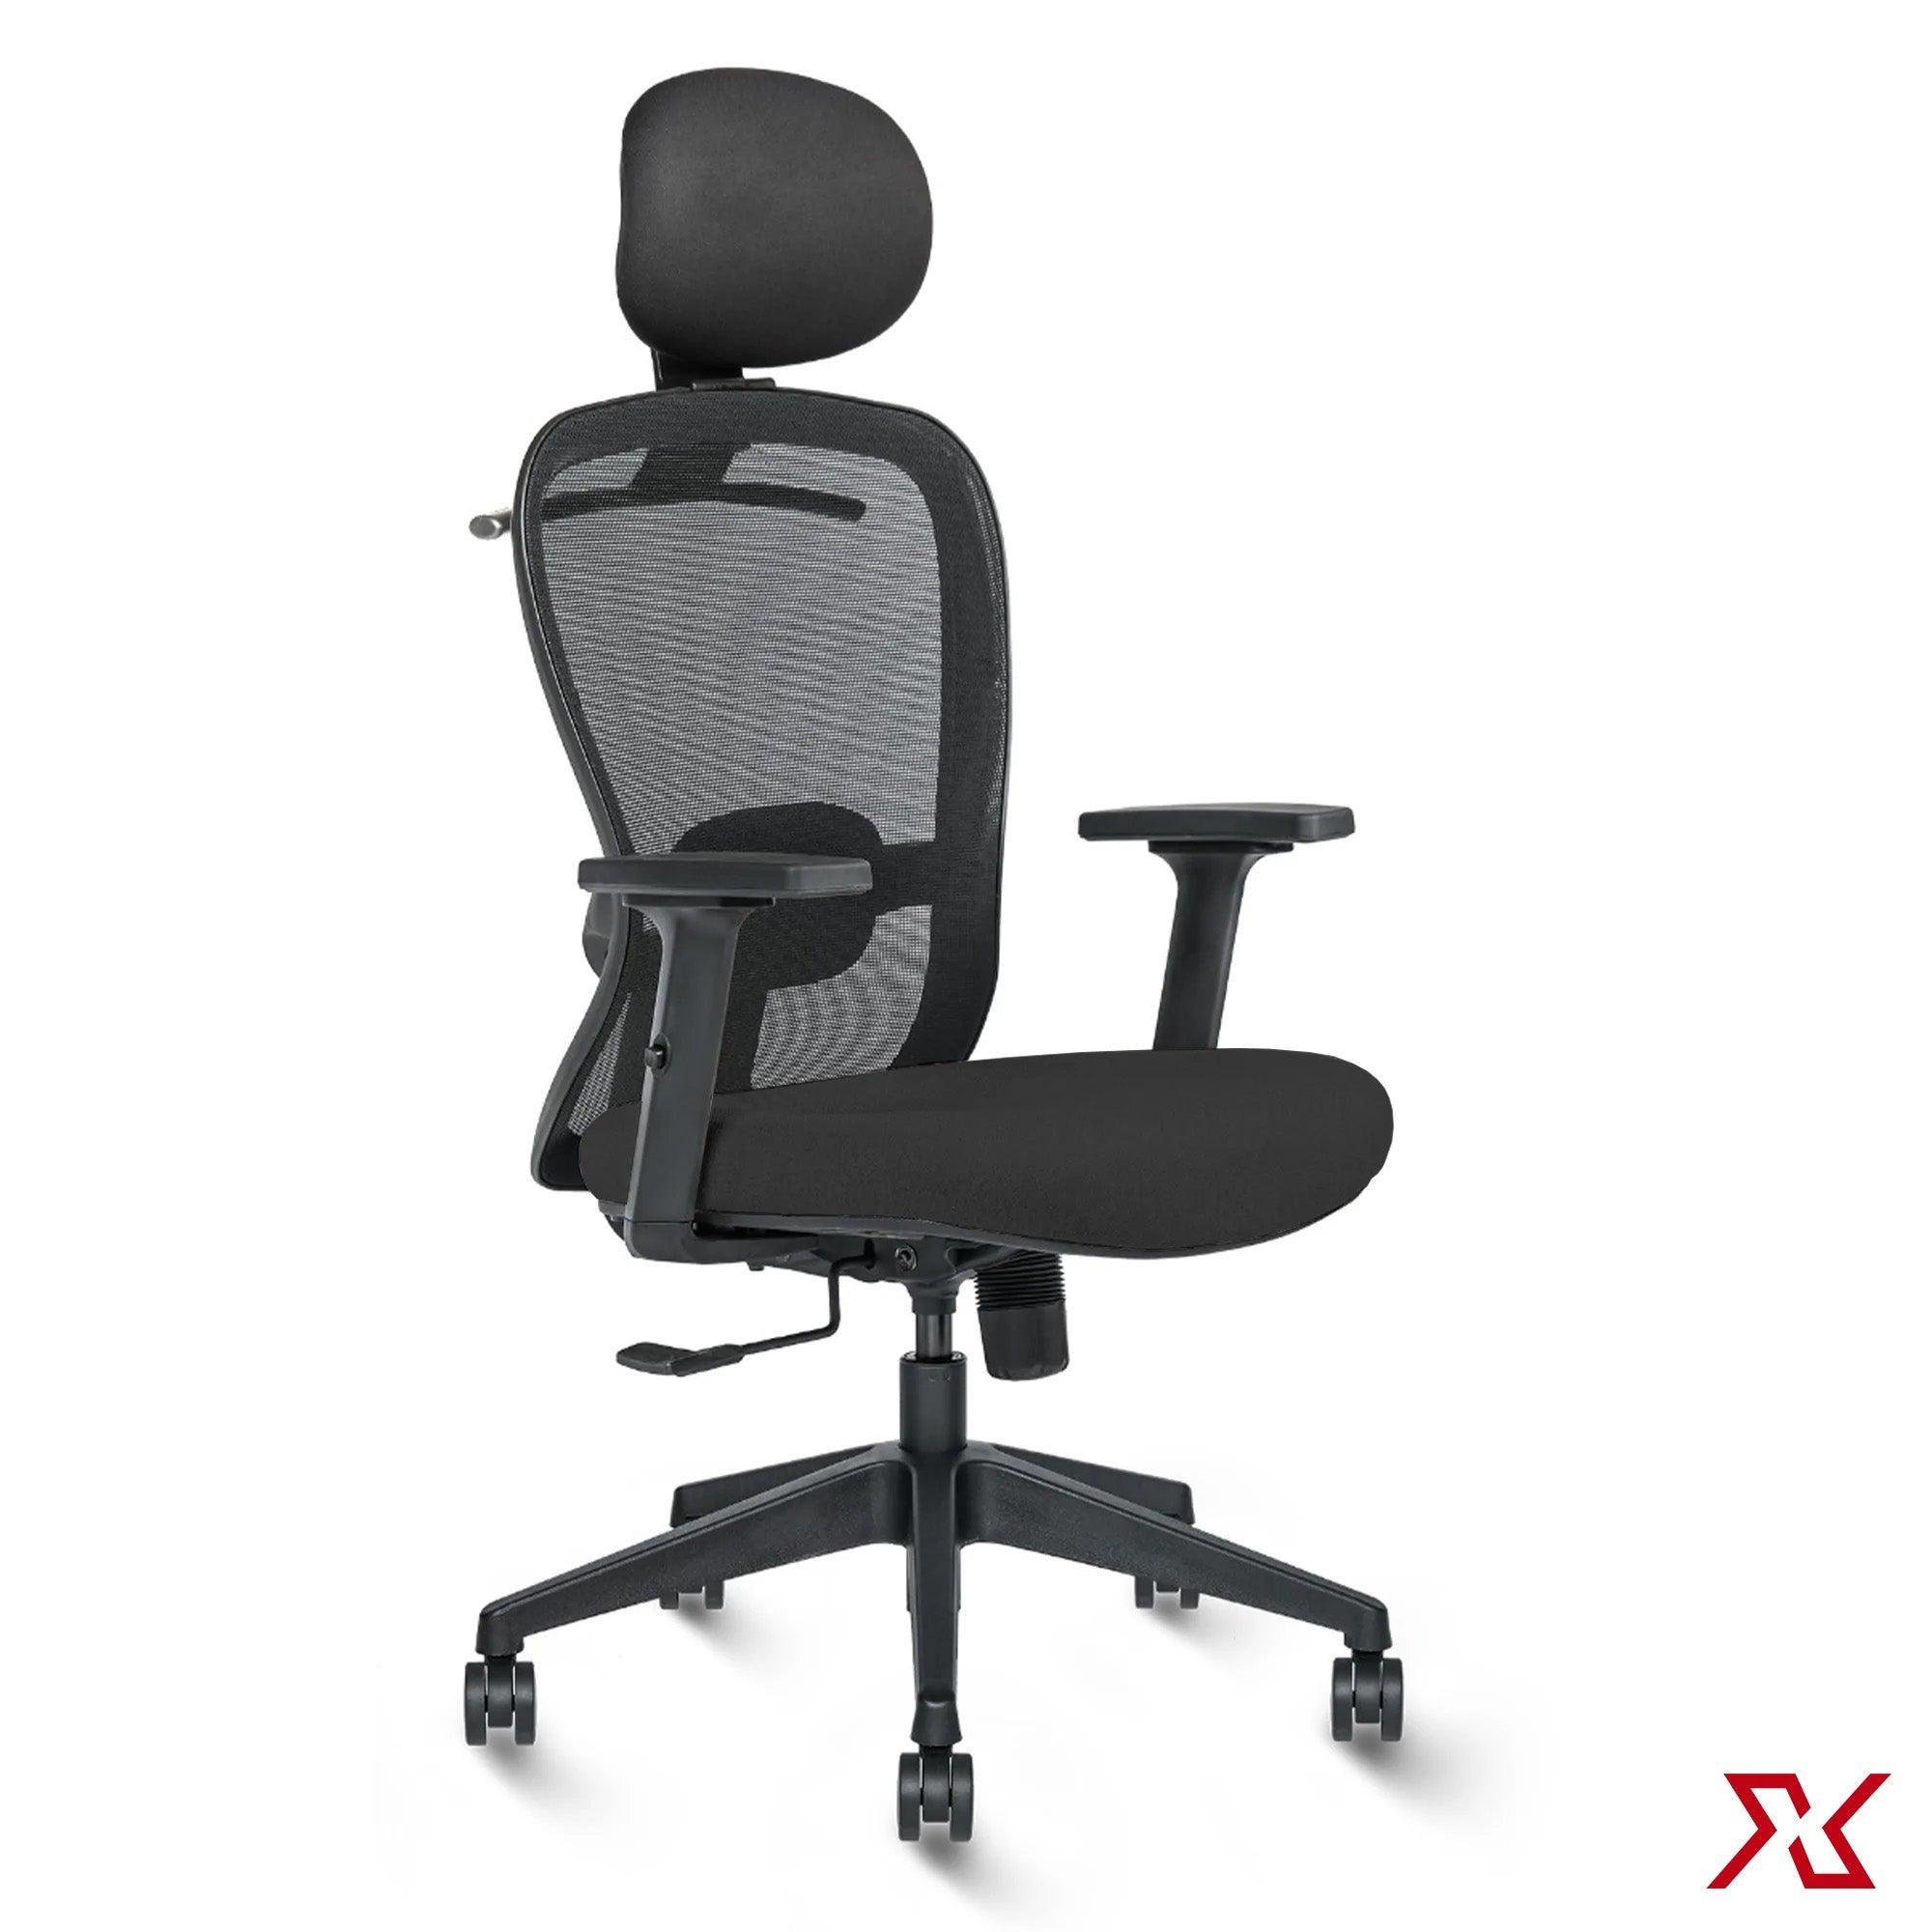 DUNE High Back LX (Black Chair) - Exclusiff Seating Sytems